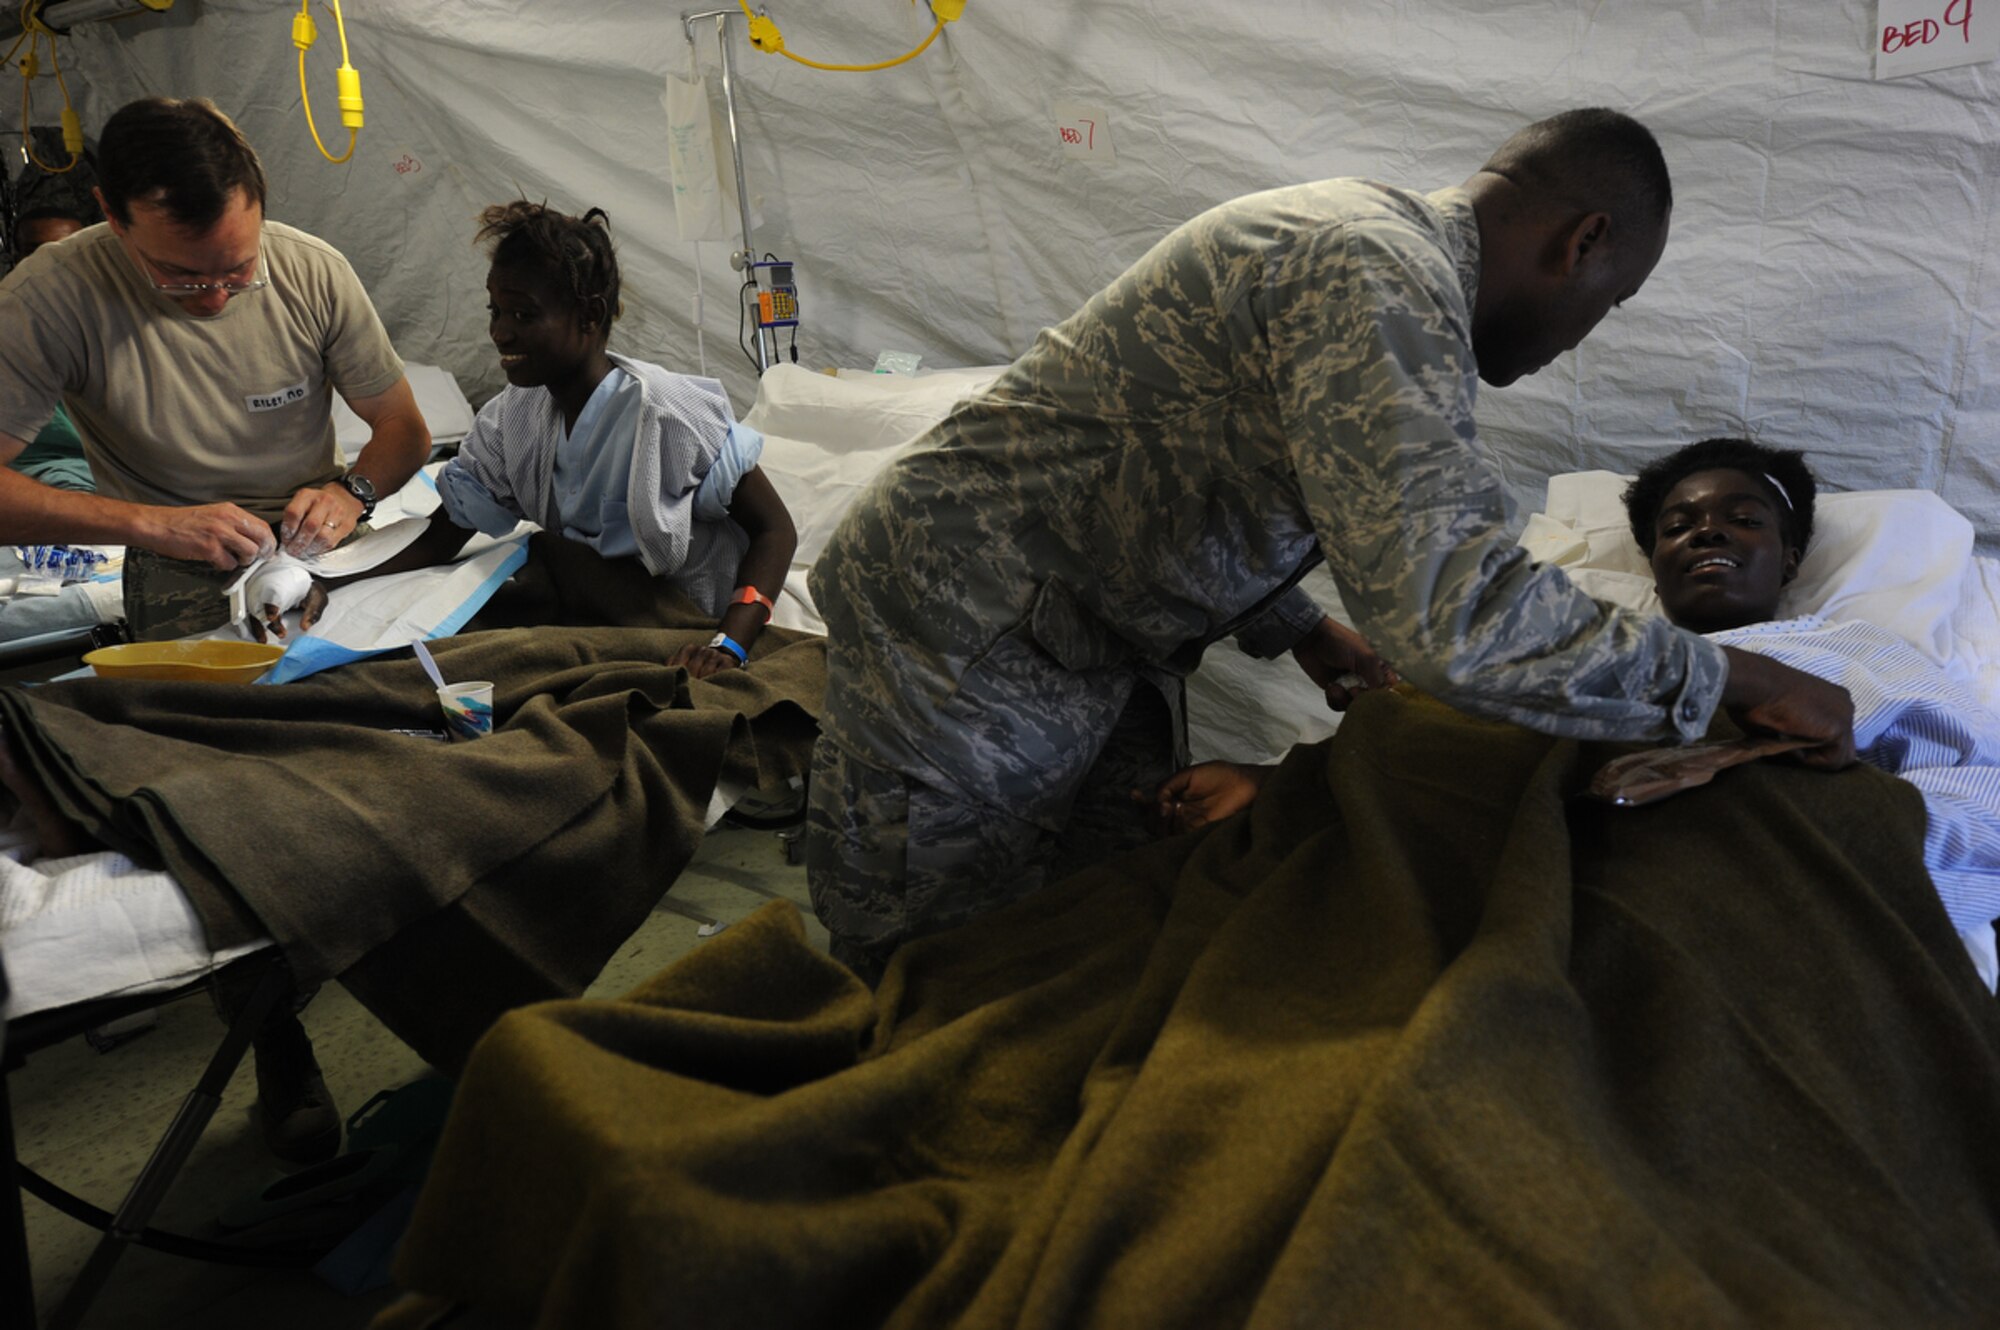 PORT-AU-PRINCE, Haiti - Airmen attached to Air Force Expeditionary Medical Squadron, Four Three Six, from Travis AF Base, Sacramento Cali., and Navy Corpsman treat earthquake survivors at an expeditionary medical facility located along the harbor of Port-au-Prince, Haiti February 3, 2010. A 7.0 earthquake Tuesday, January 12, left thousands of Haitians displaced, without access to food, water and vital medical care. (U.S. Navy Photo by Mass Communication Specialist 2nd Class Todd Frantom)